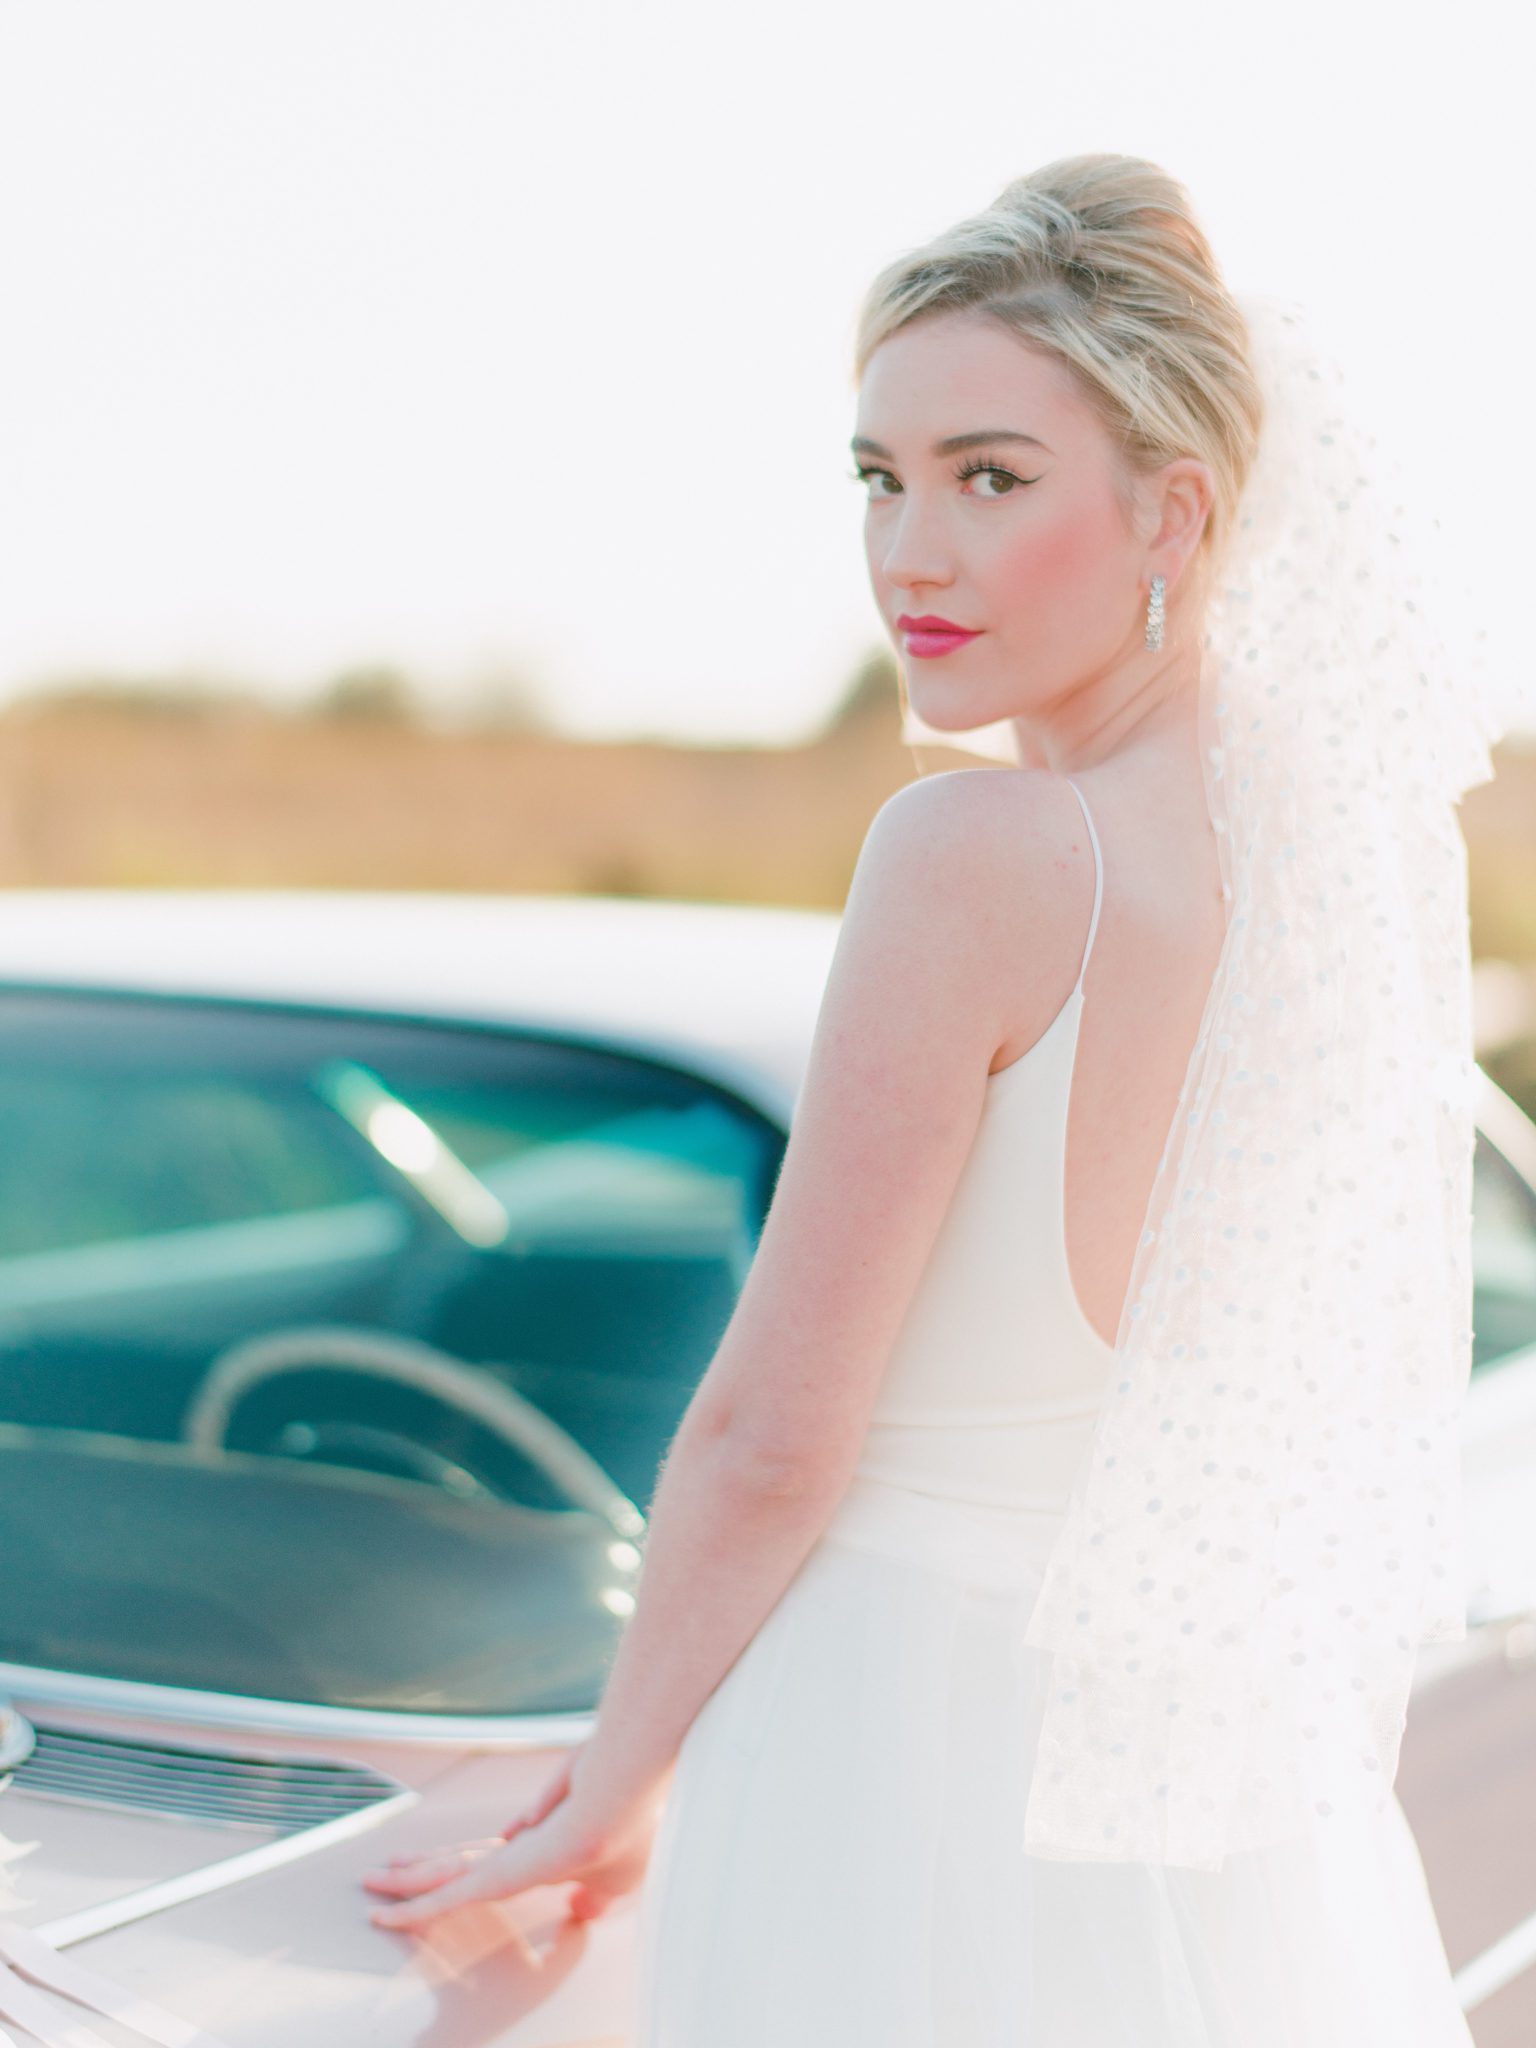 Coolest bridal vibes featuring pink Cadillac and retro style, 2022 bridal trends